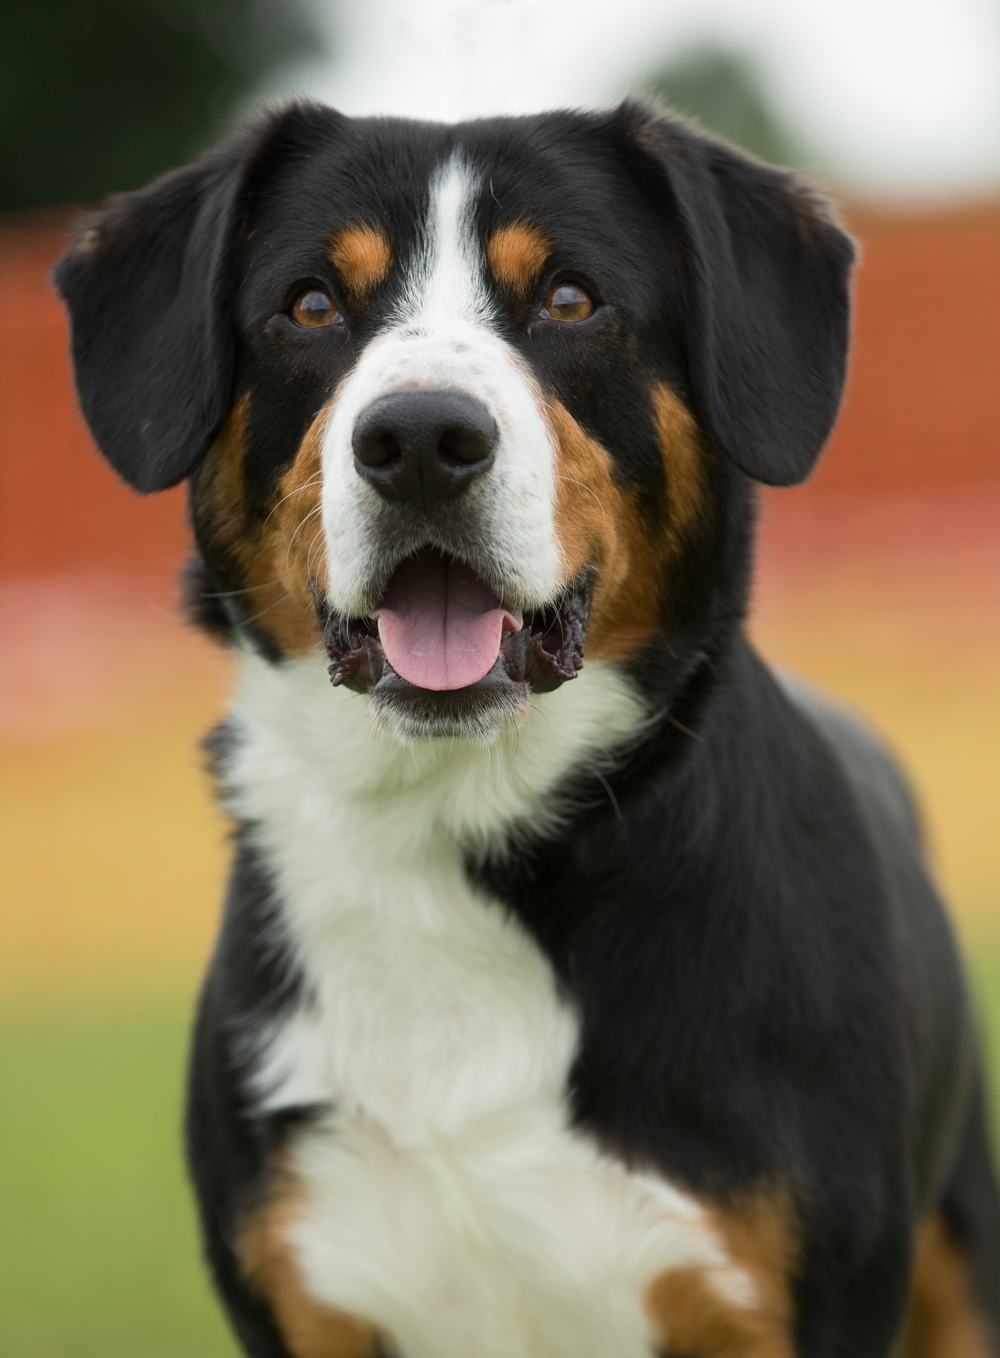 More imported register breeds competing at Crufts than 2023 | The Kennel Club
Entlebucher Mountain Dog